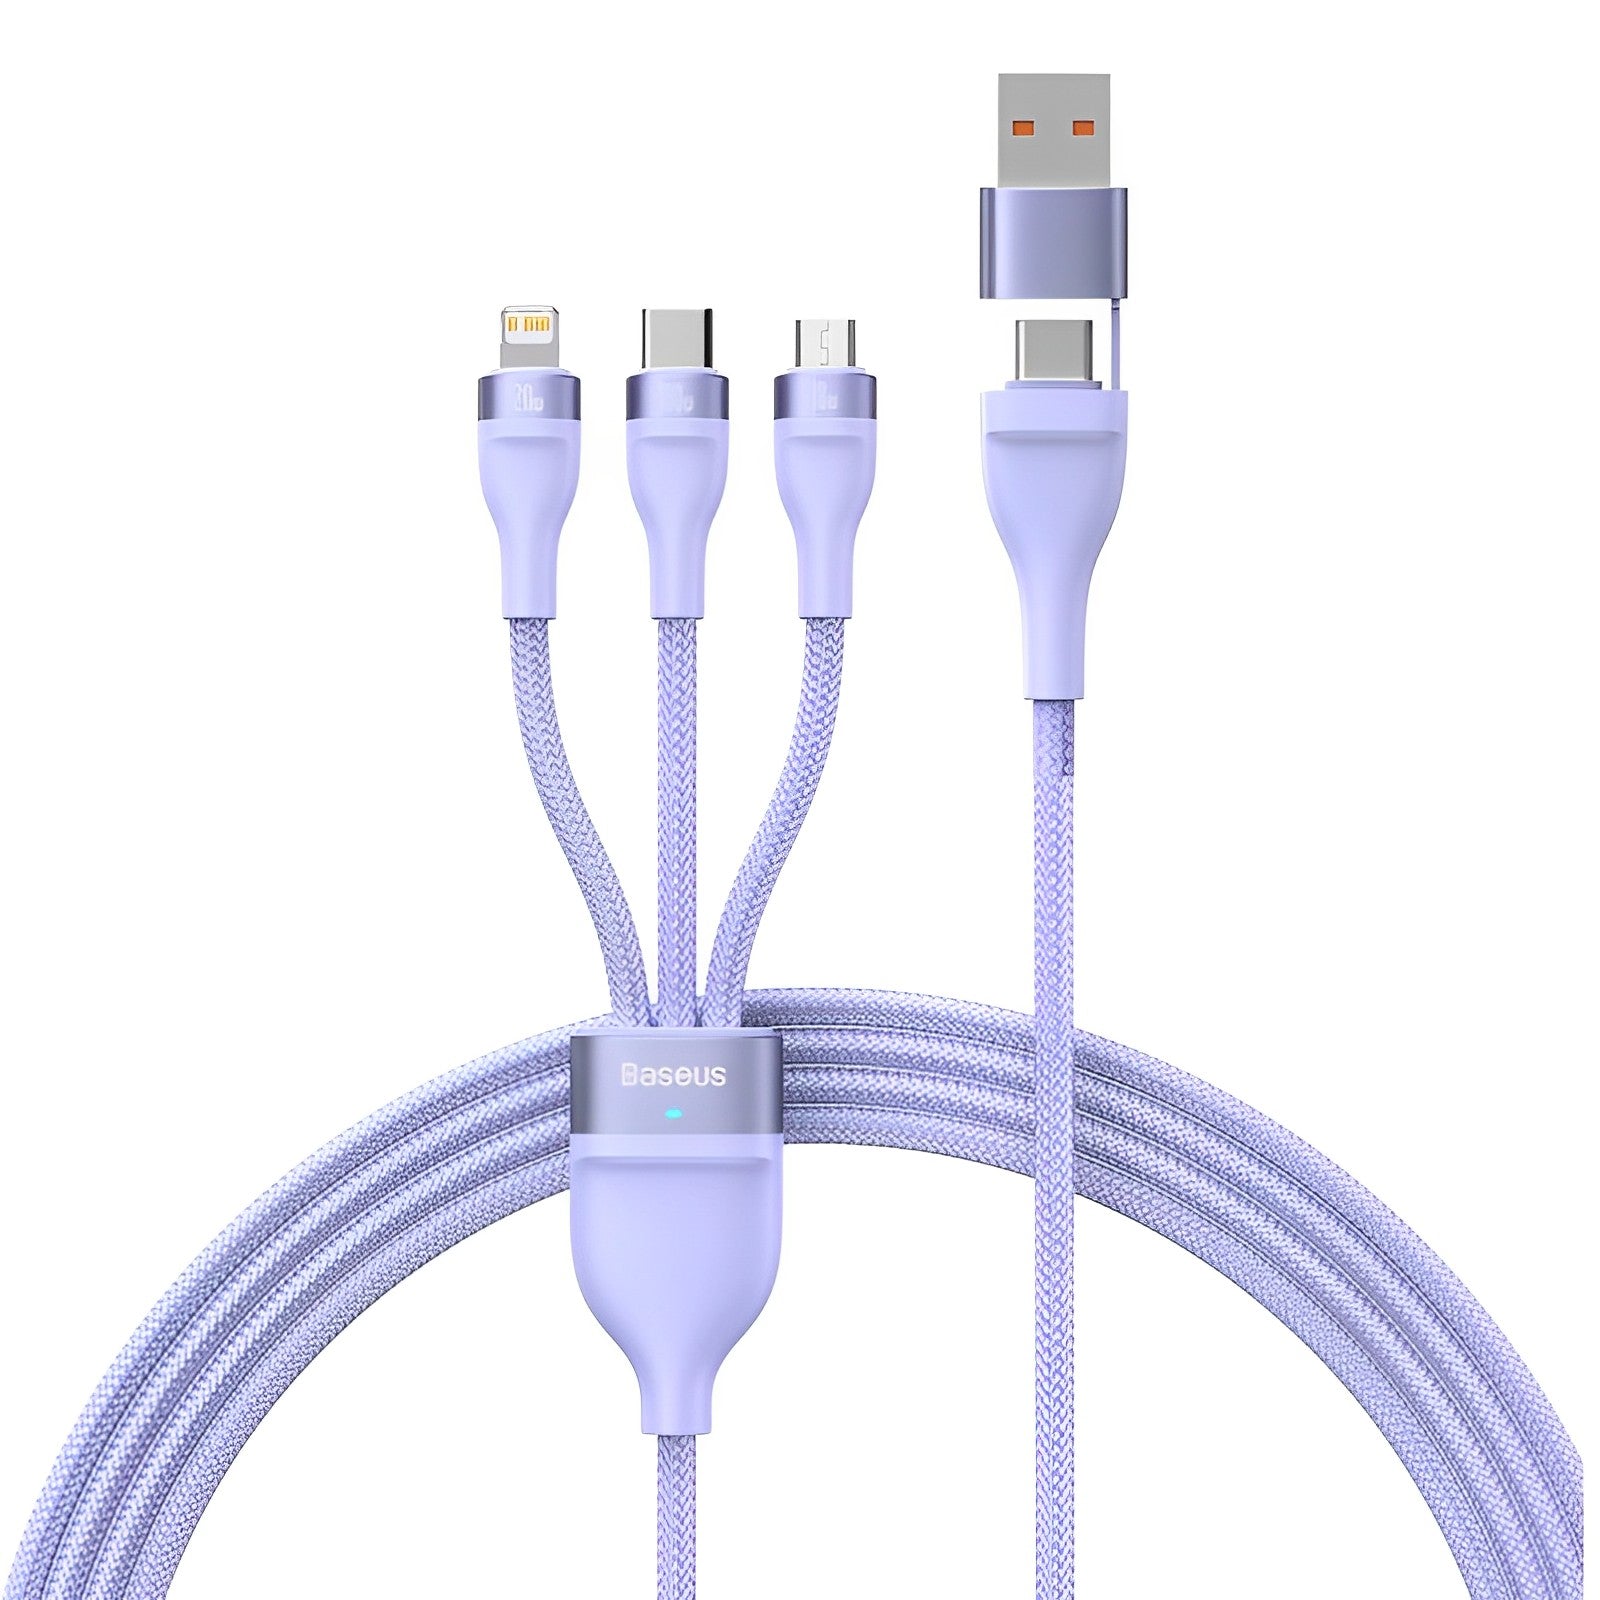 A cable that connects USB-C devices.